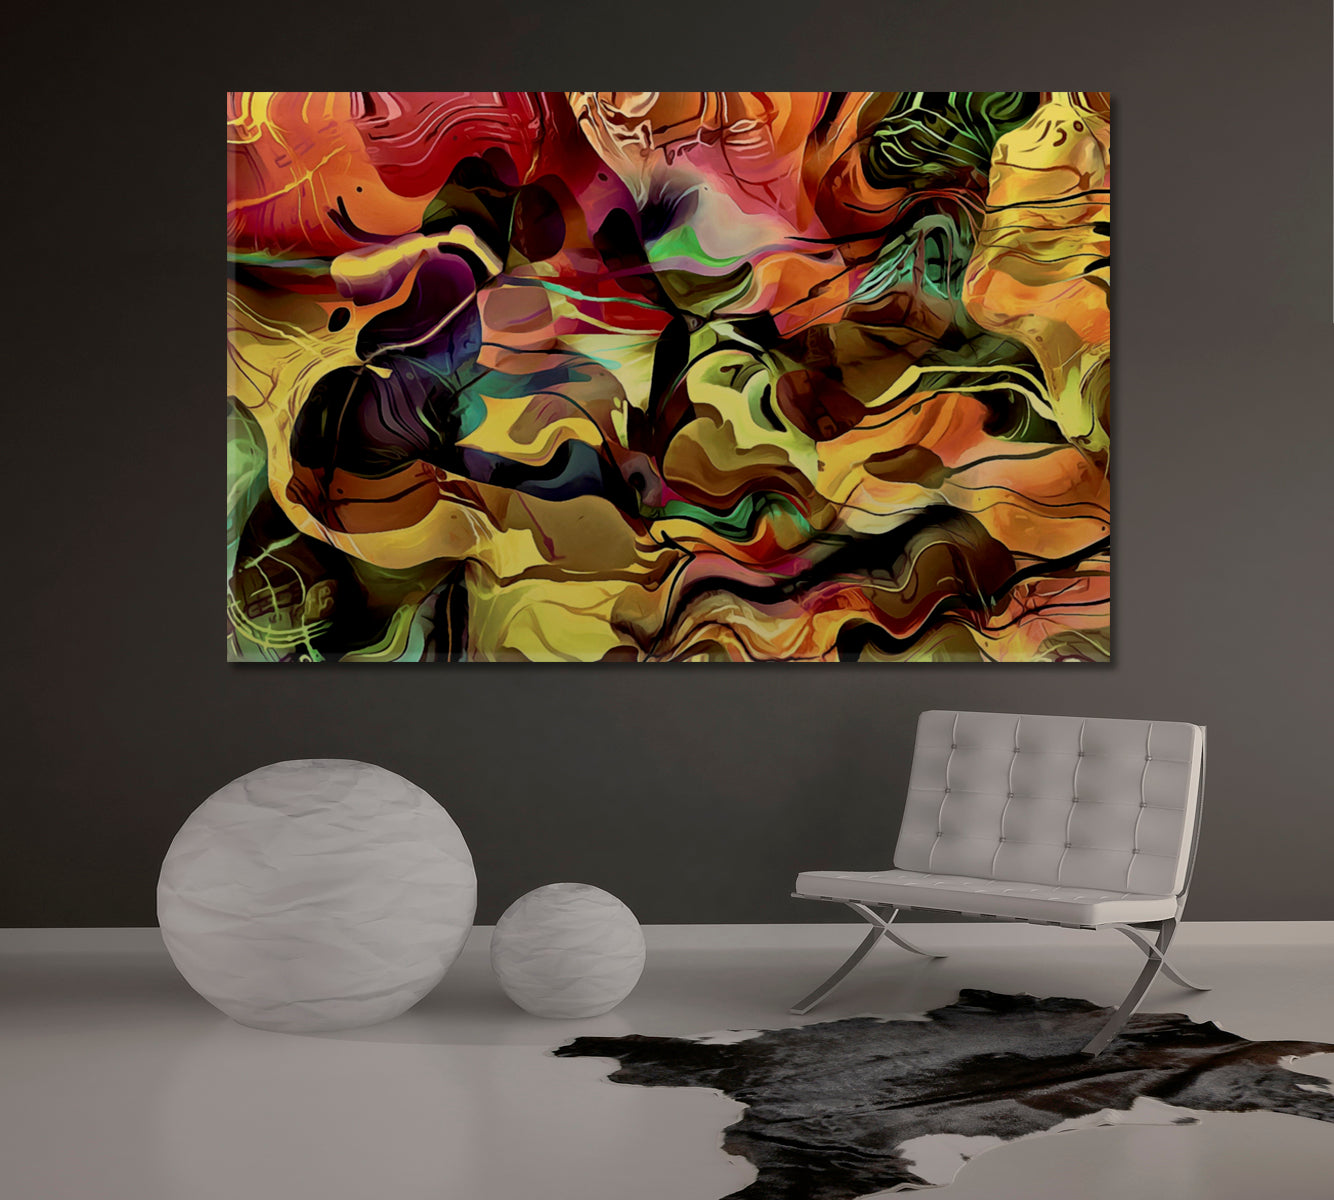 Abstract Colorful Wavy Spirals Contemporary Art Artesty 1 panel 24" x 16" 